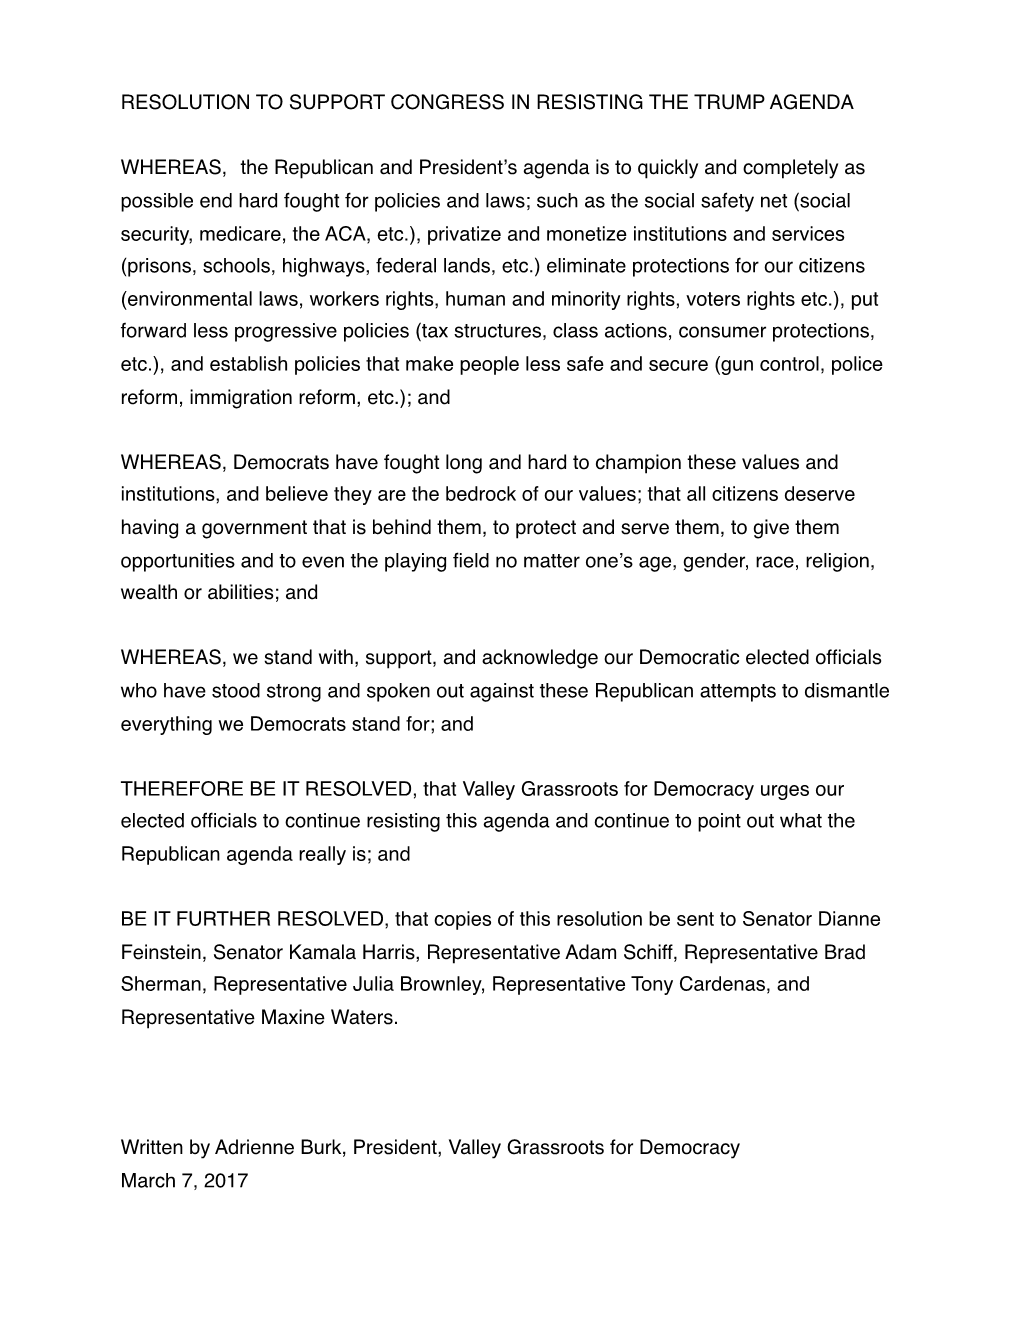 Resolution to Support Congress in Resisting the Trump Agenda